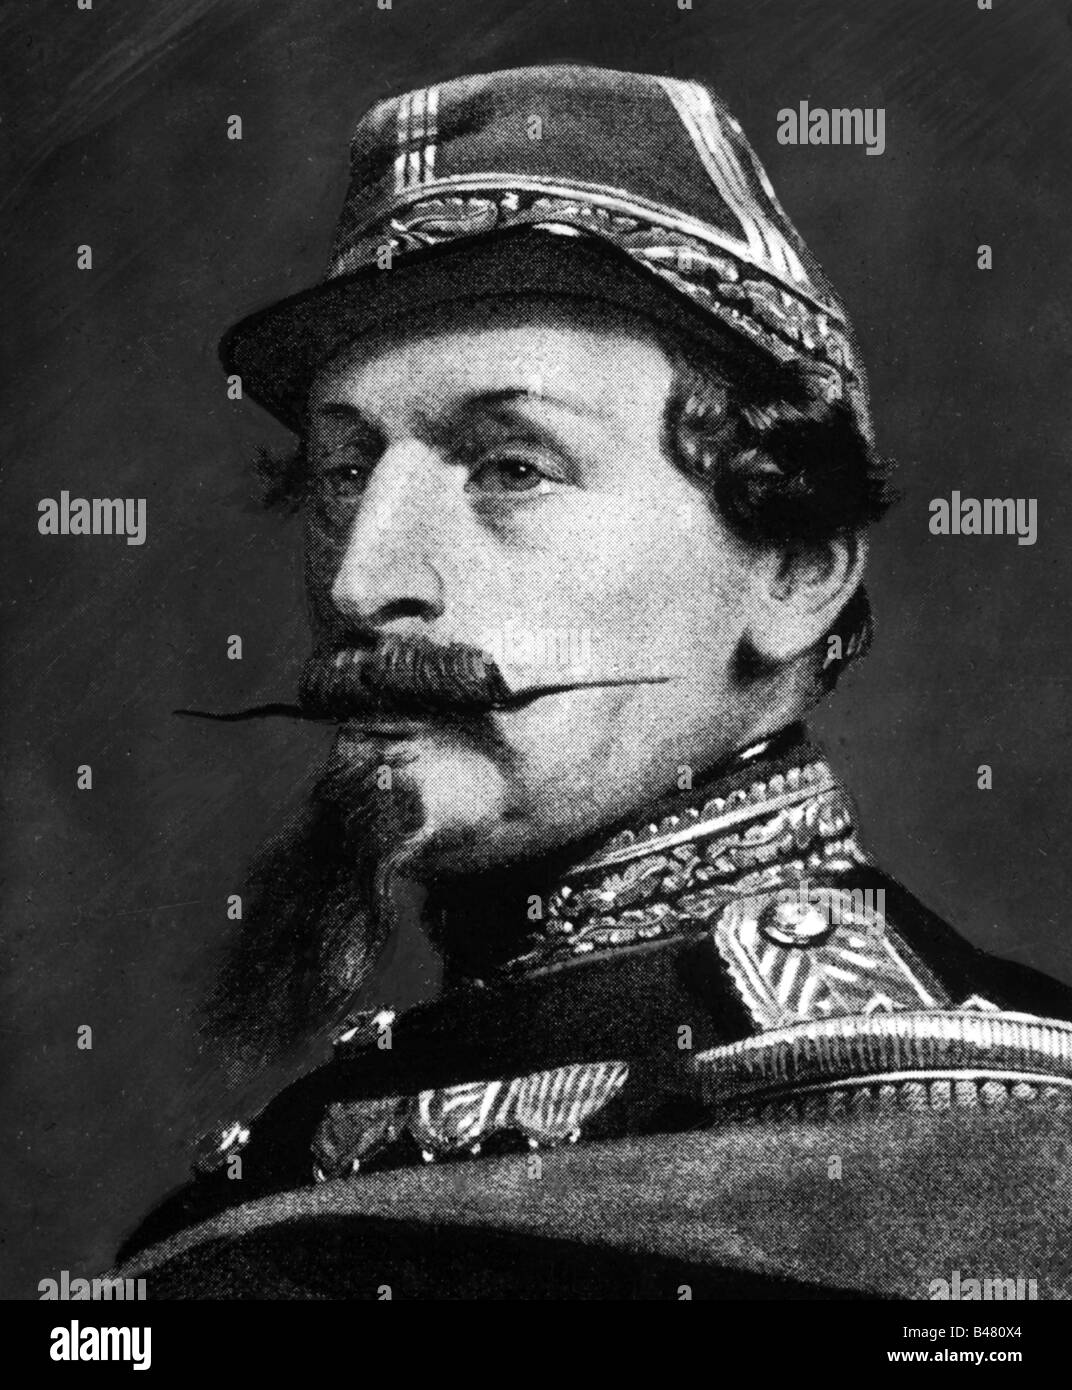 Napoleon III., 20.4.1808 - 9.1.1873, Emperor of the French 2.12.1852 - 2.9.1870, portrait, after lithograf, circa 1860, , Stock Photo